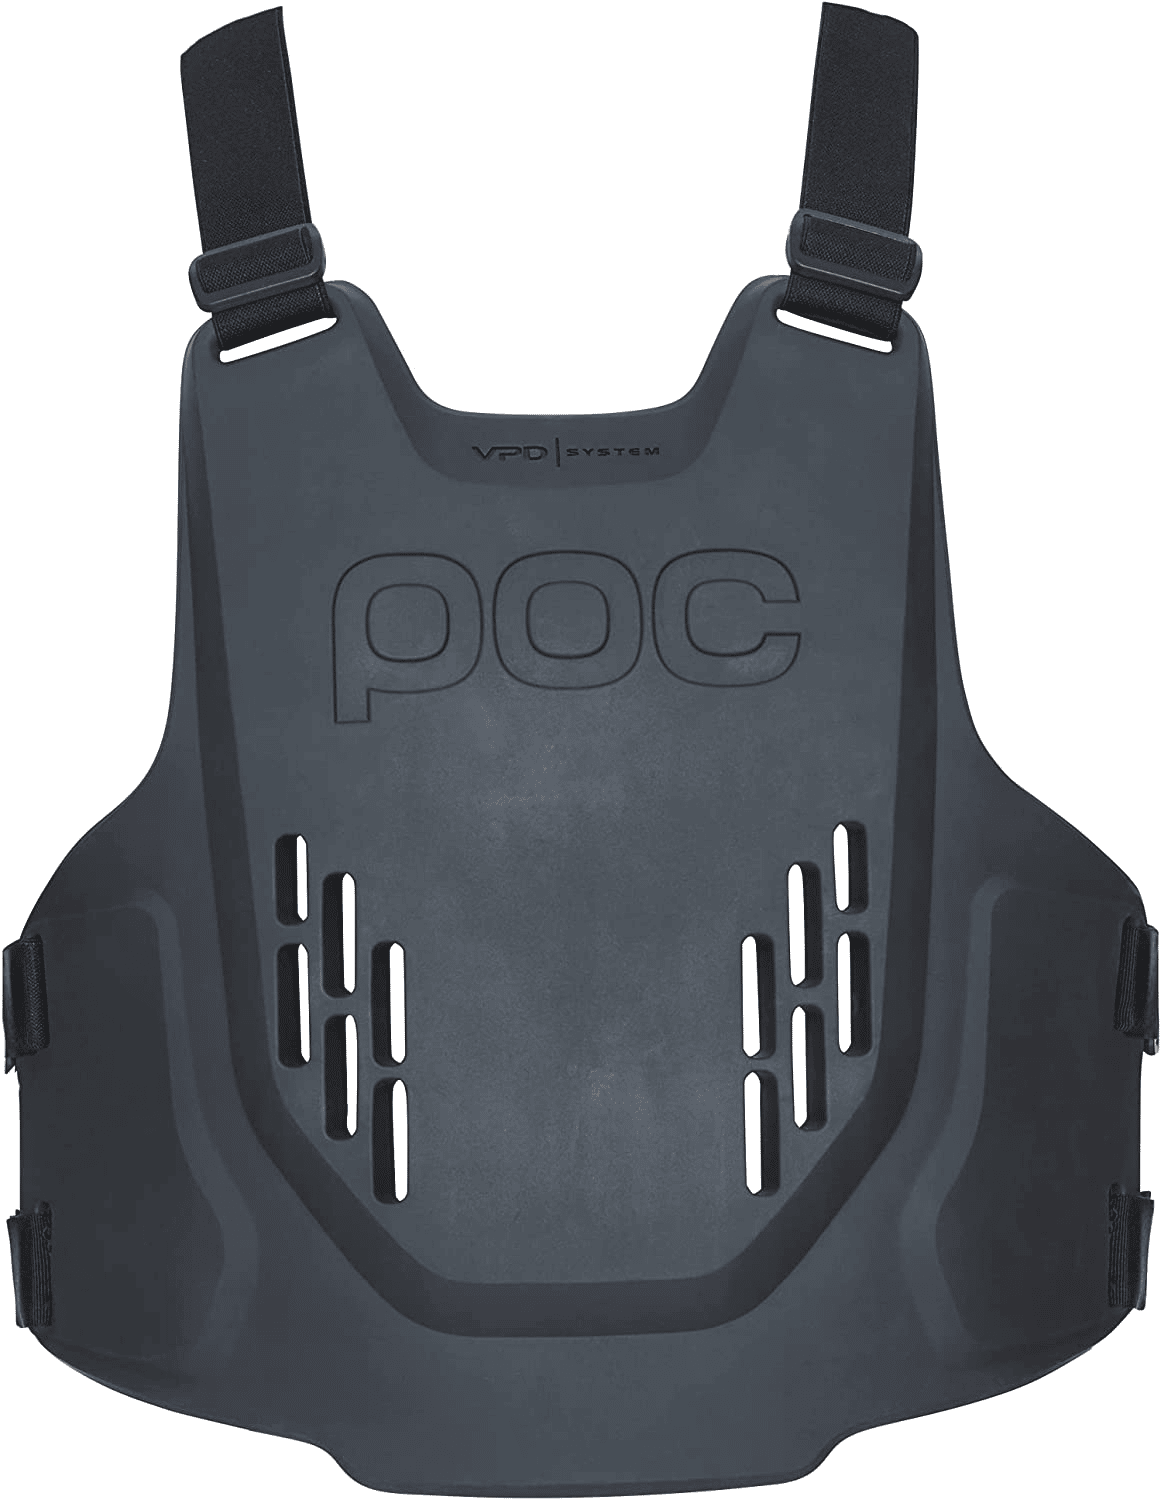 When it comes to back and chest injuries mountain bike chest armor like this is impacted the most.